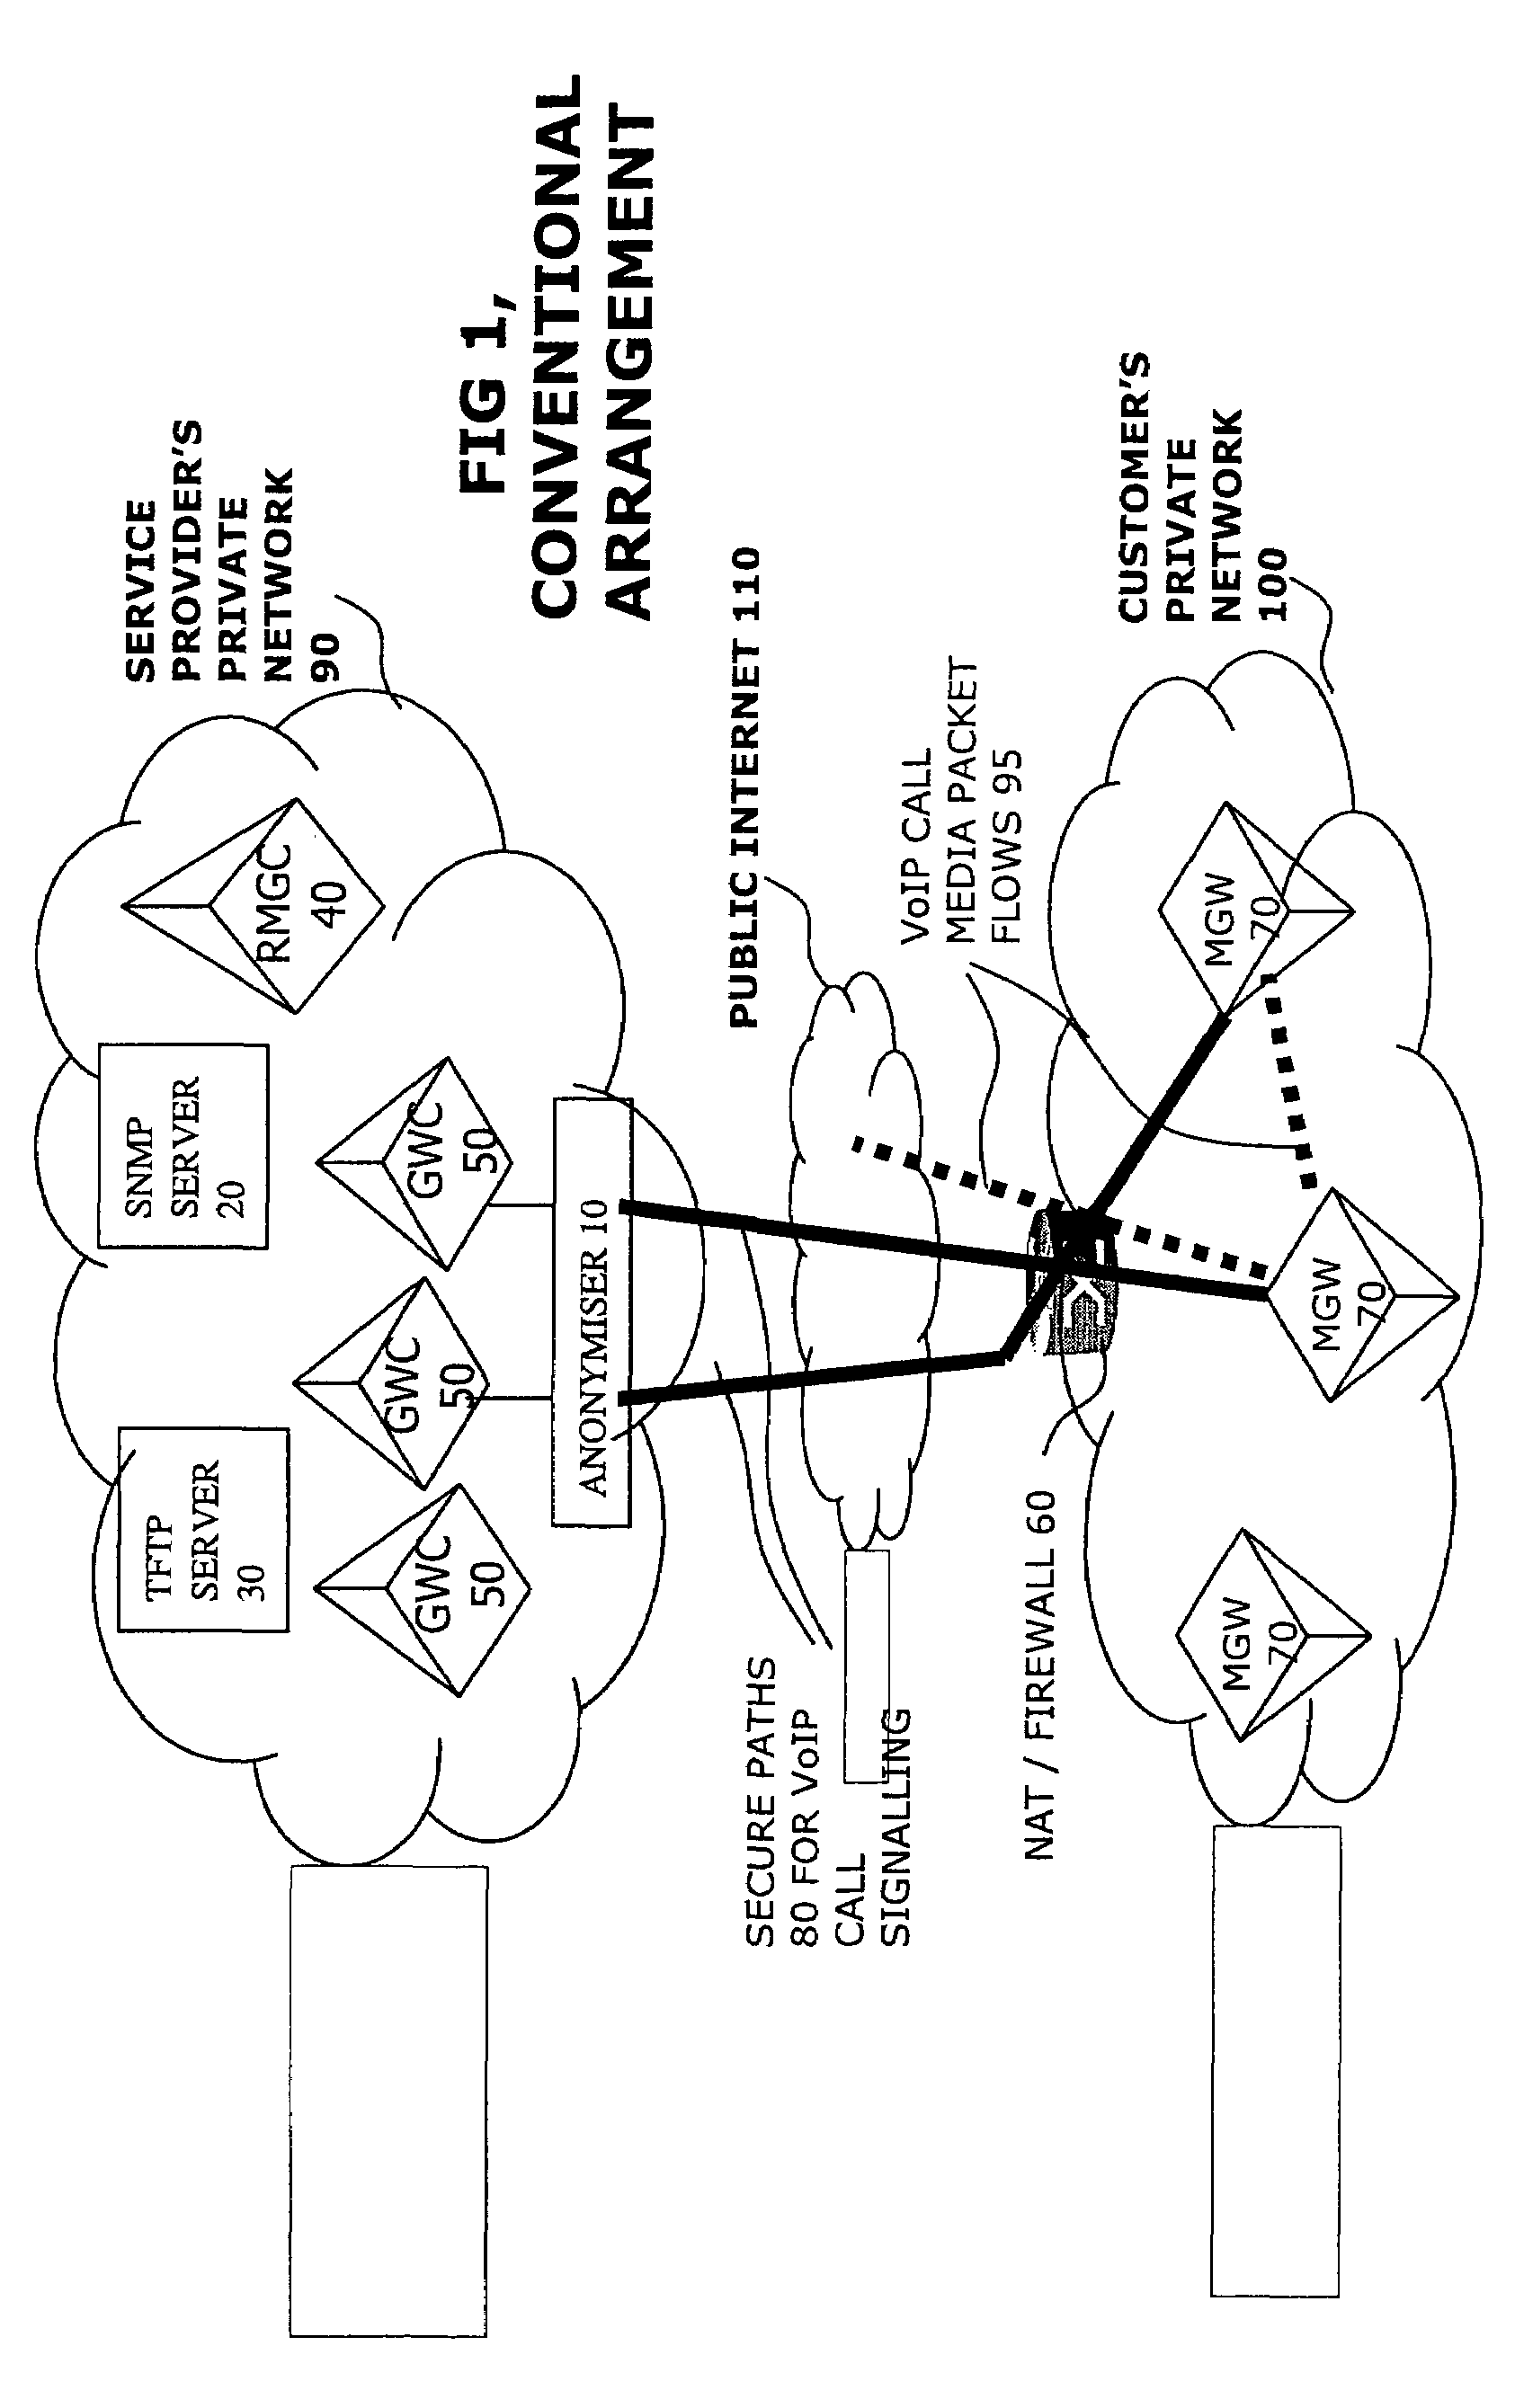 Network address translator and secure transfer device for interfacing networks